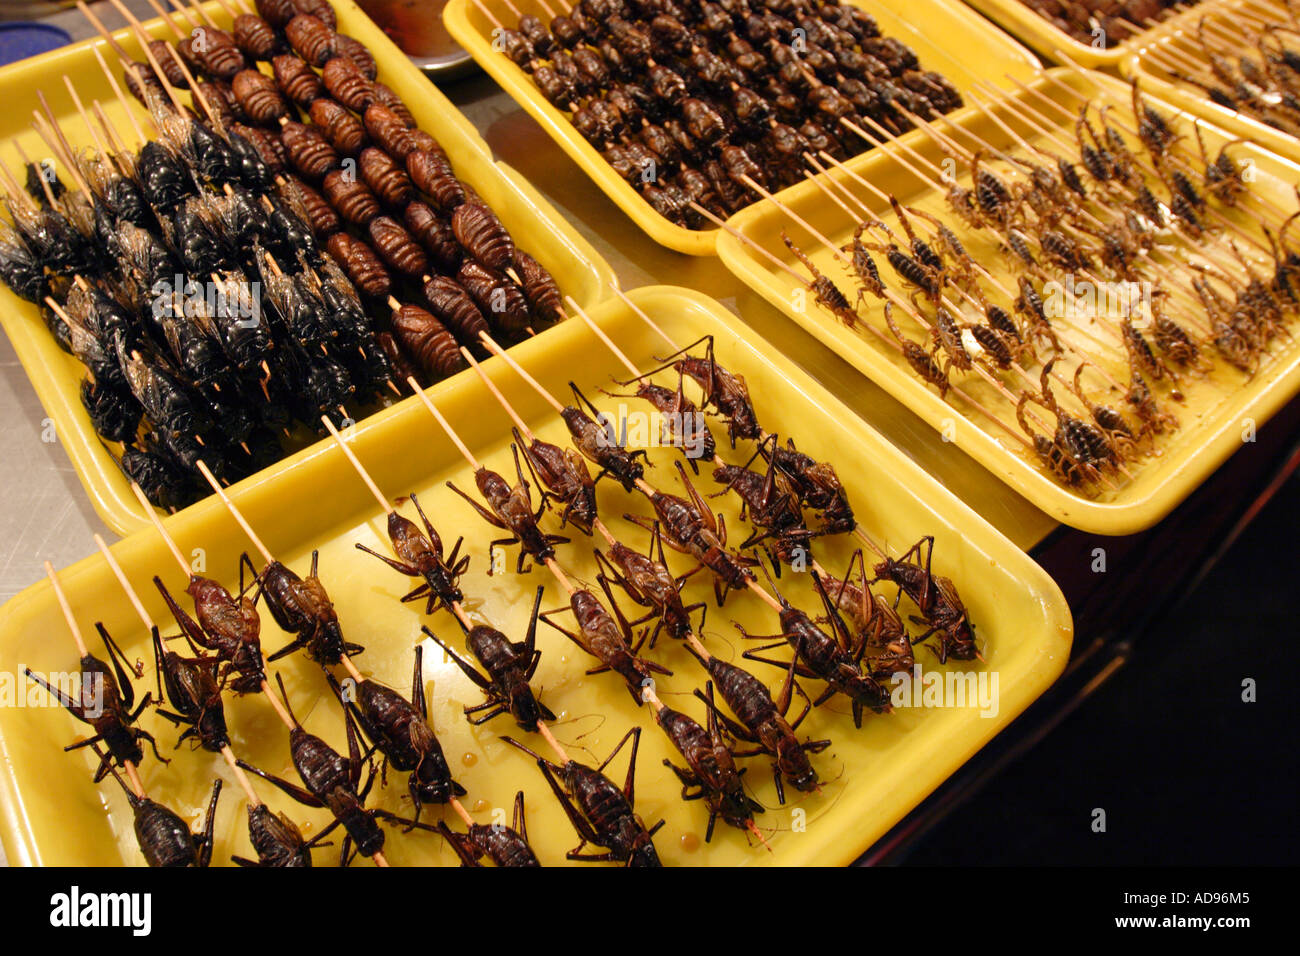 Bugs on sale at Donghuamen night food market in Beijing China Stock Photo